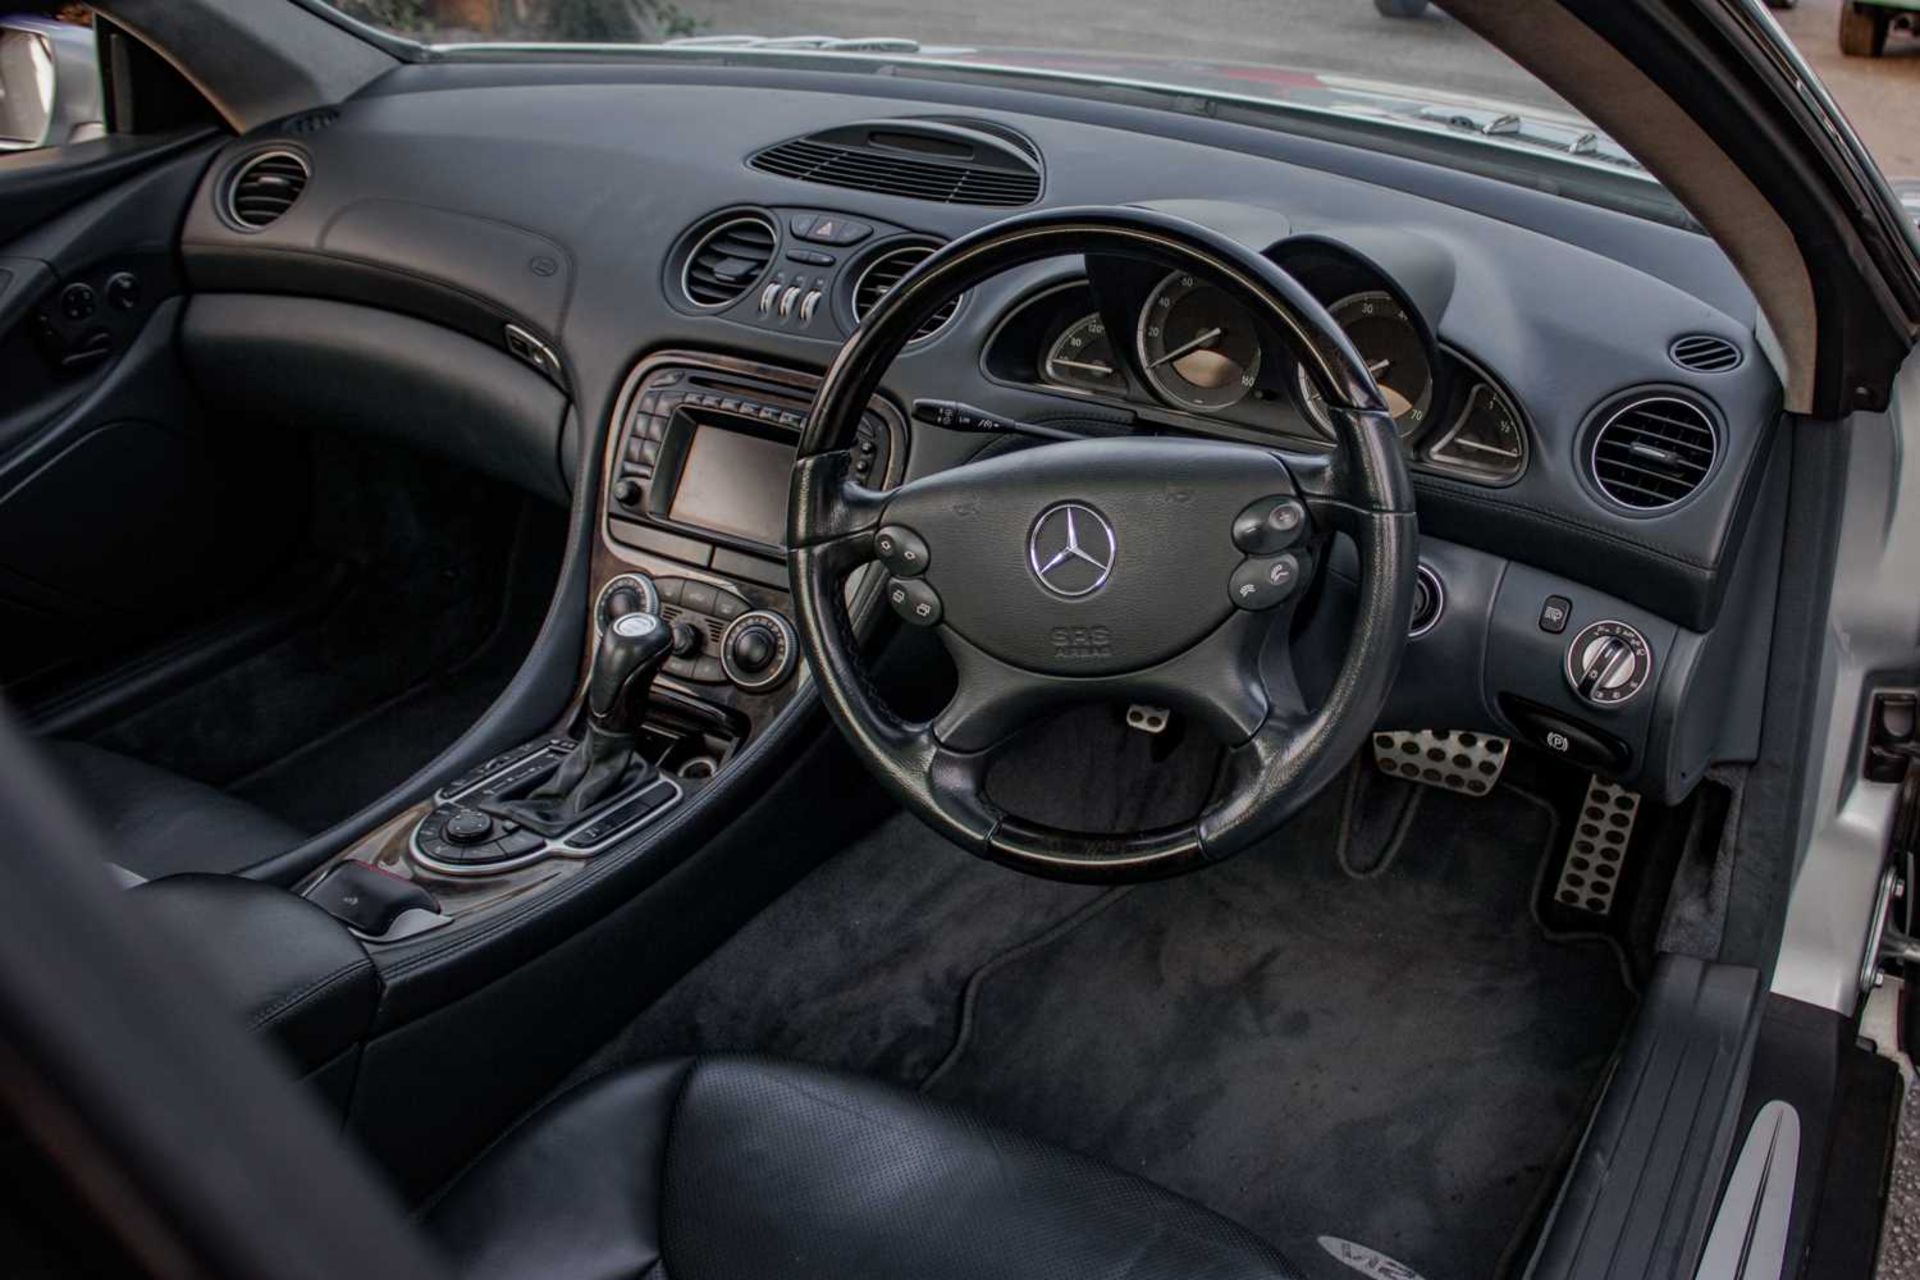 2004 Mercedes SL600 Flagship, 493bhp twin-turbo powered model  - Image 27 of 42